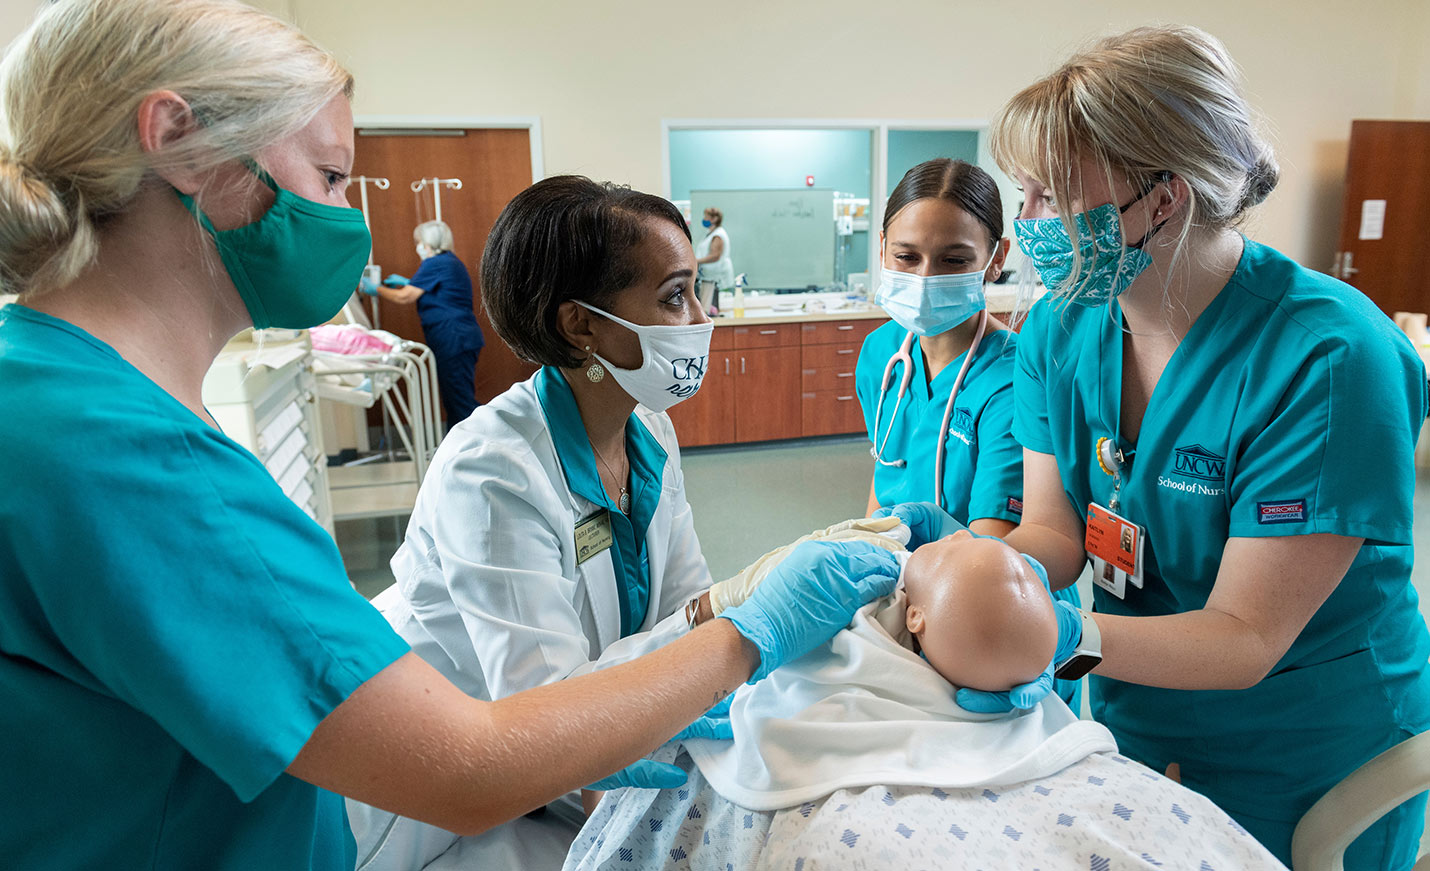 Nursing students practice with a labor and deliver baby mannequin.